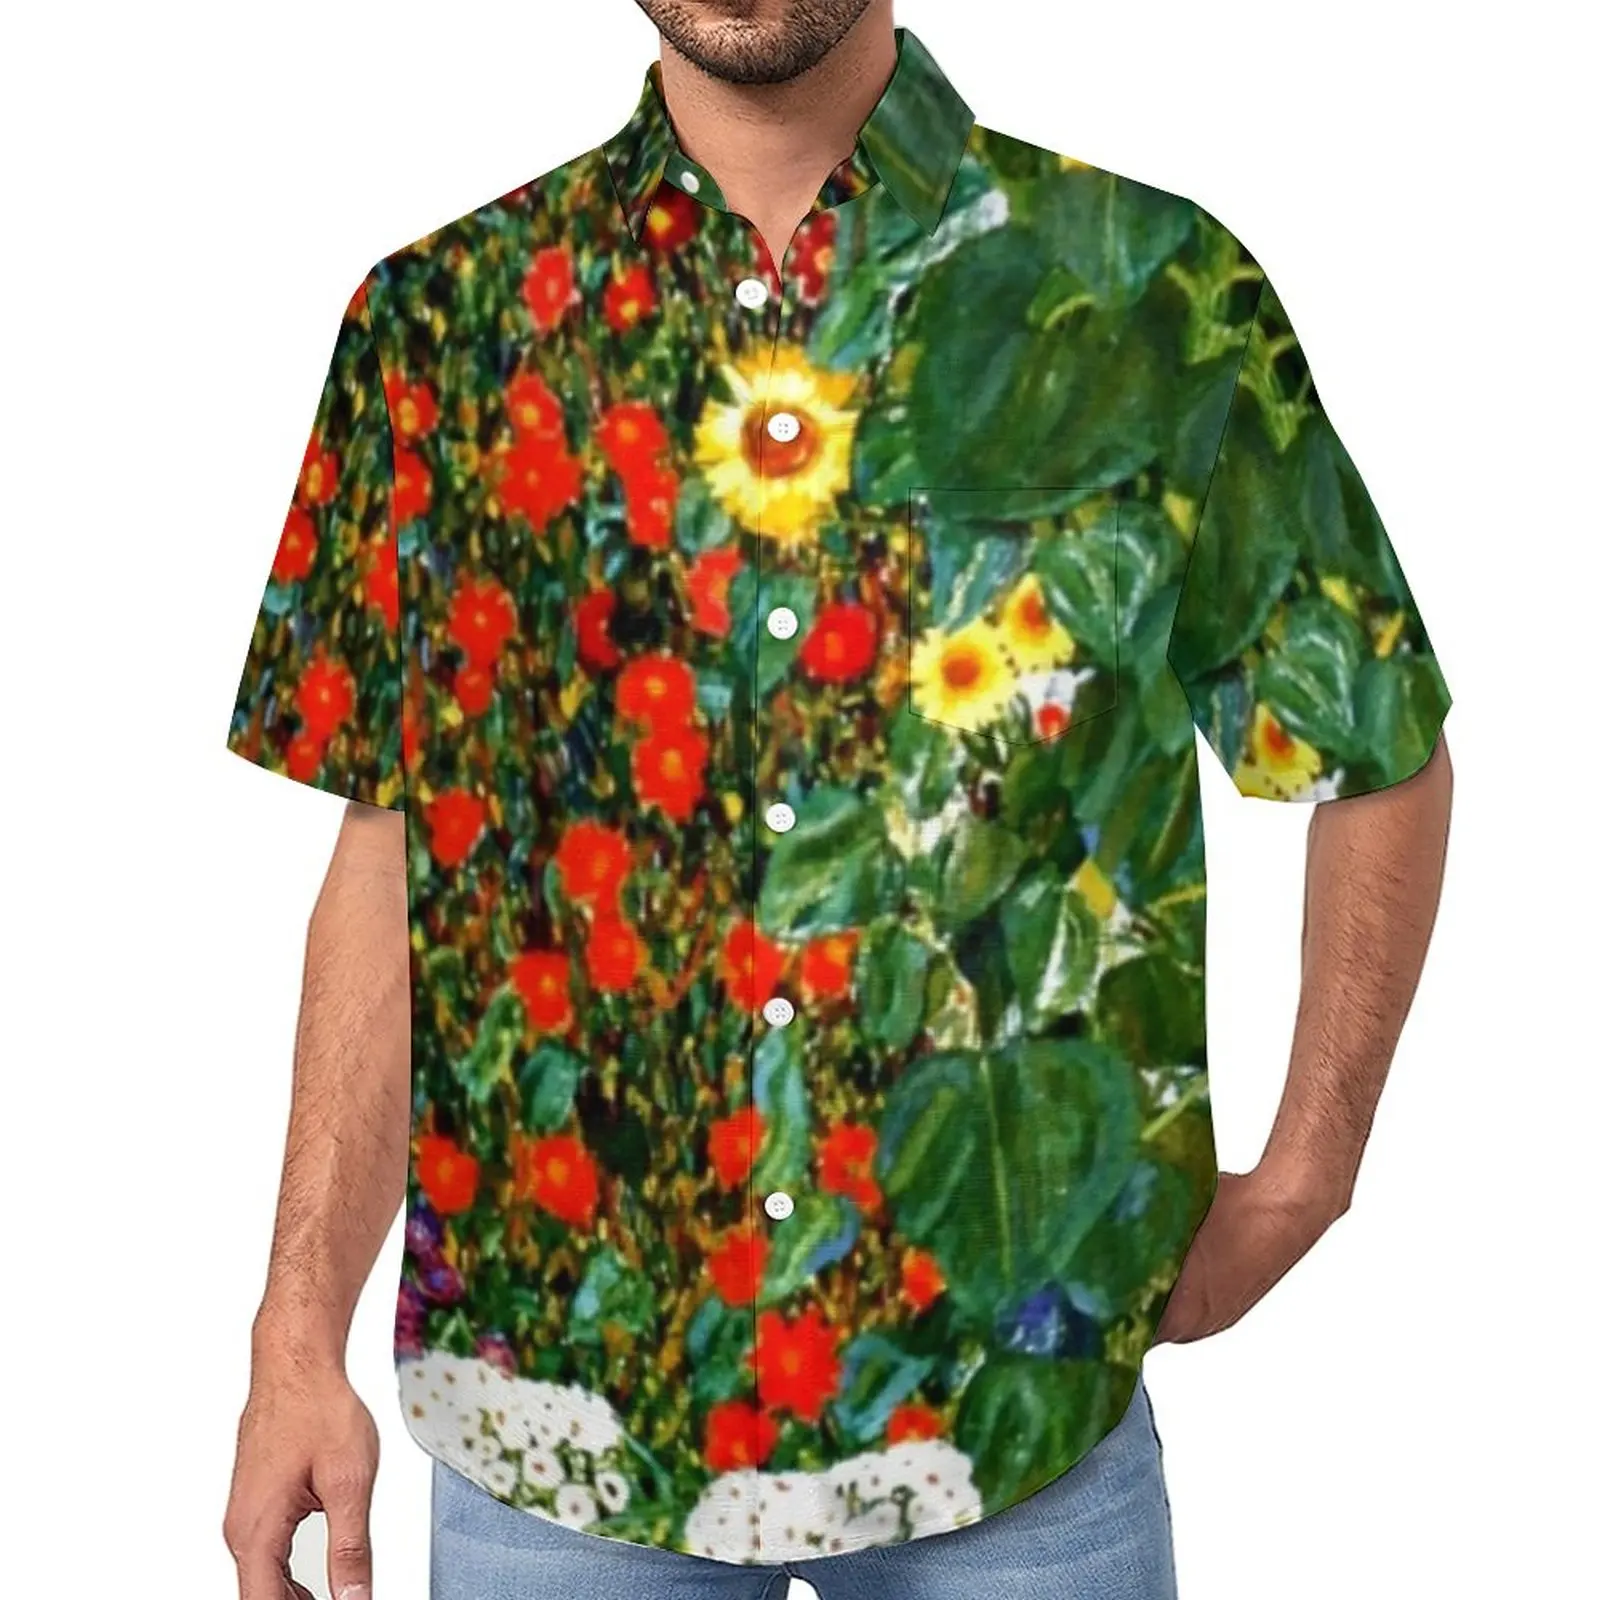 

Farm Garden Blouses Male Sunflowers Print Casual Shirts Hawaii Short Sleeve Graphic Cool Oversize Vacation Shirt Gift Idea